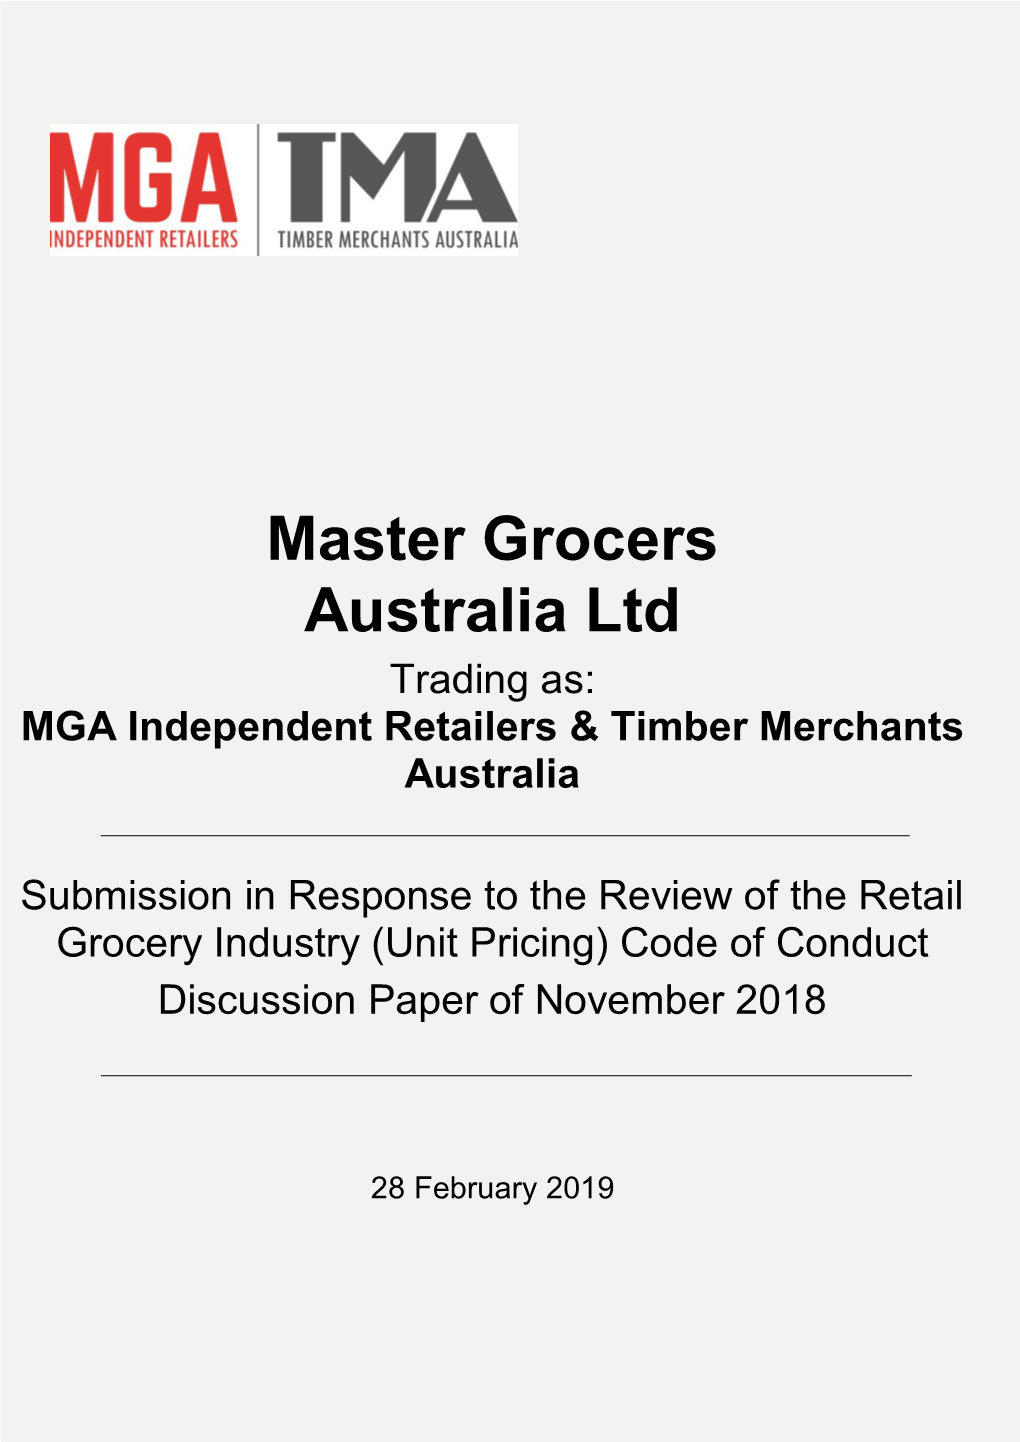 Submission by Master Grocers Australia (MGA Independent Retailers) Master Grocers Australiato Ltd